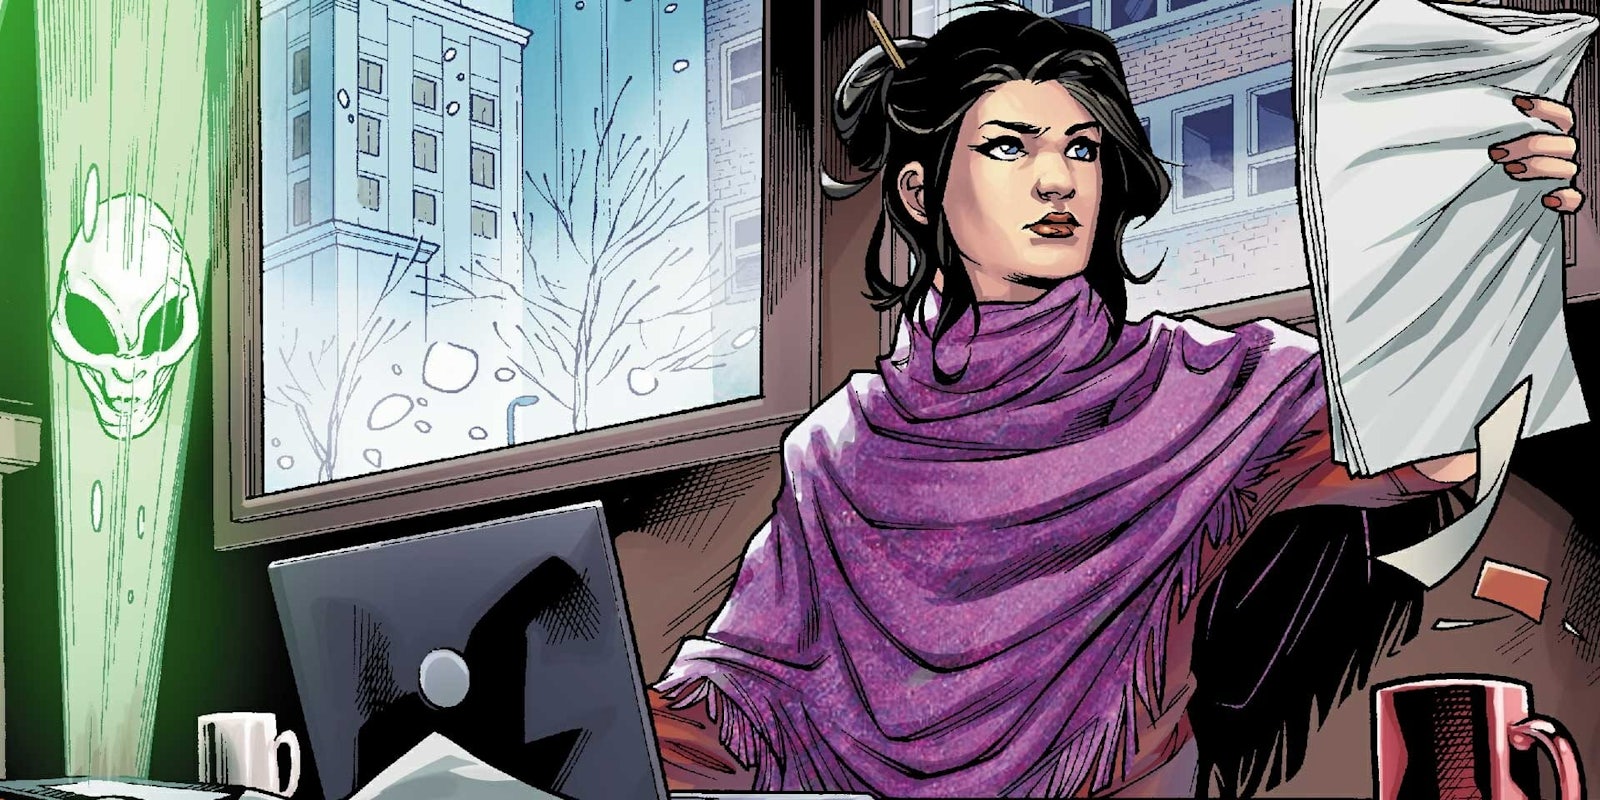 lois lane will be the focus of Metropolis, a new DC Comics show and Superman prequel